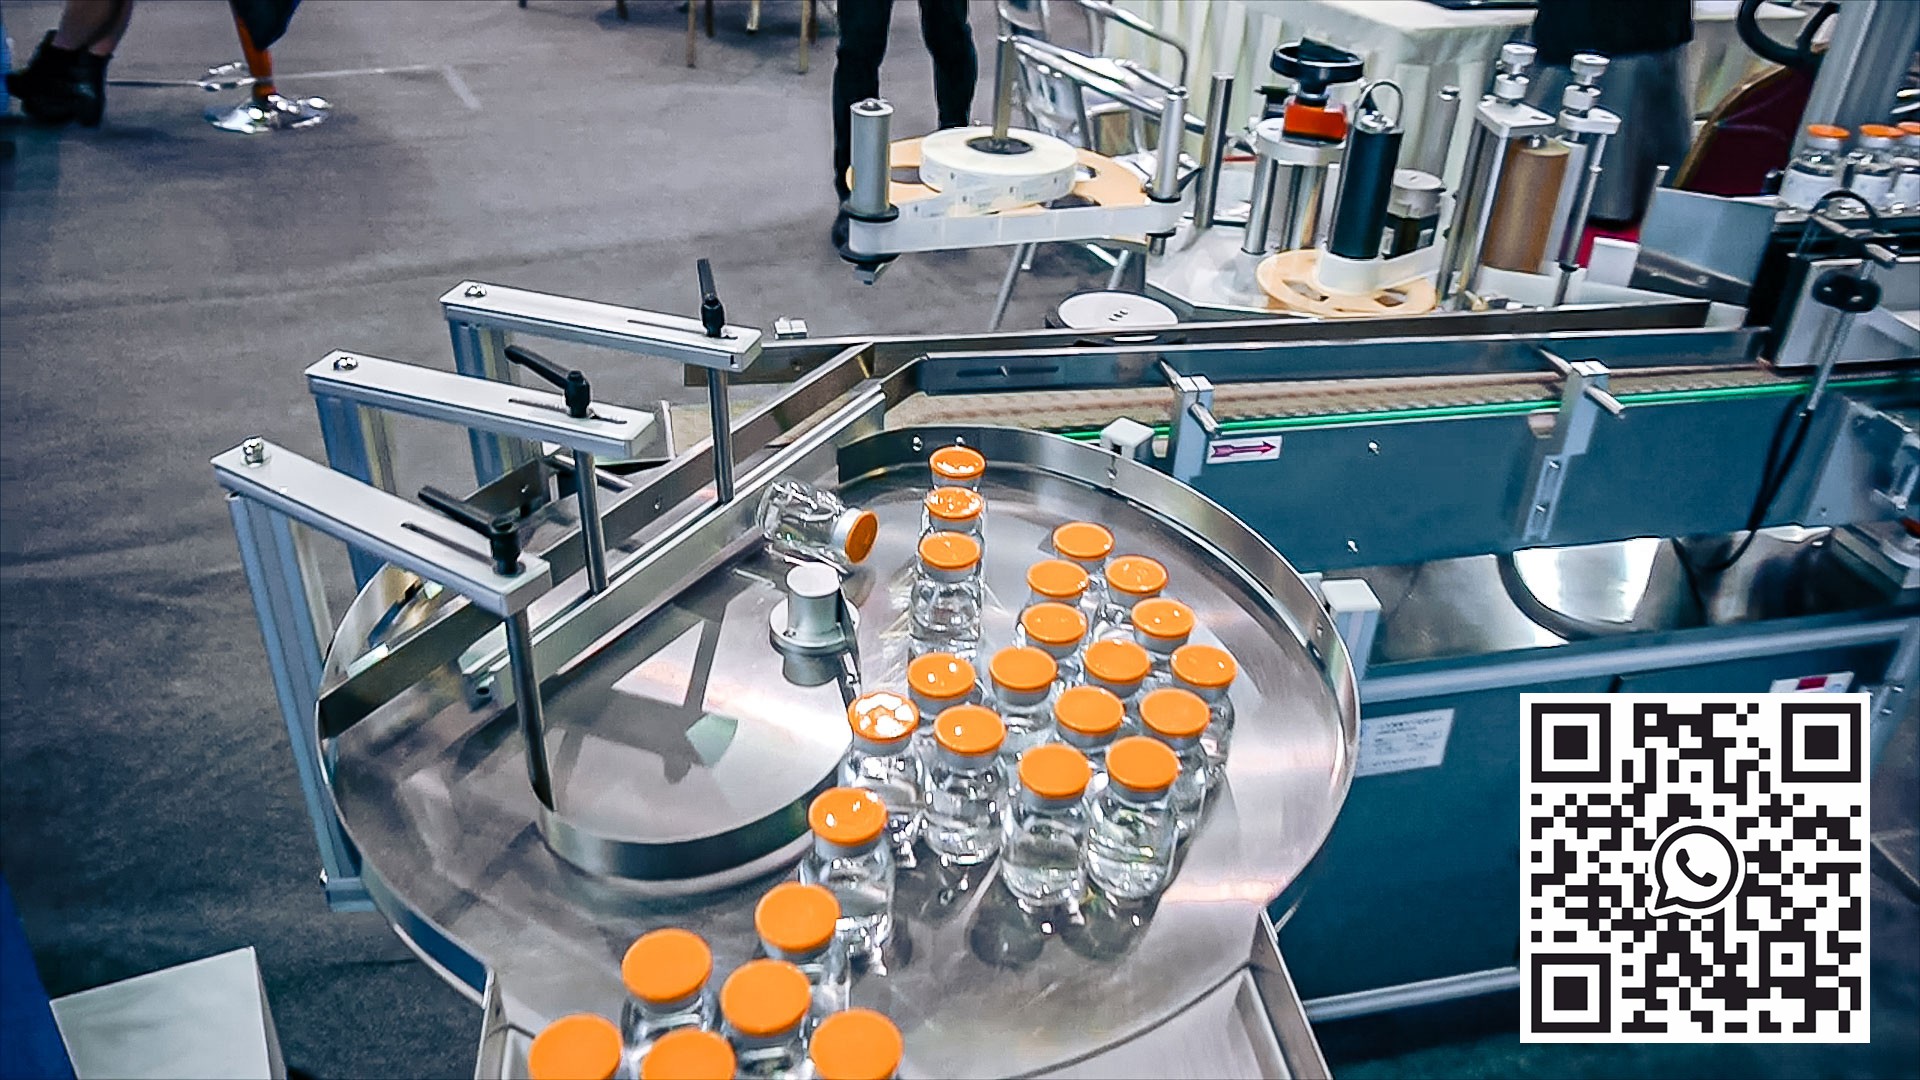 Automatic equipment for sticking self-adhesive labels on the glass bottles